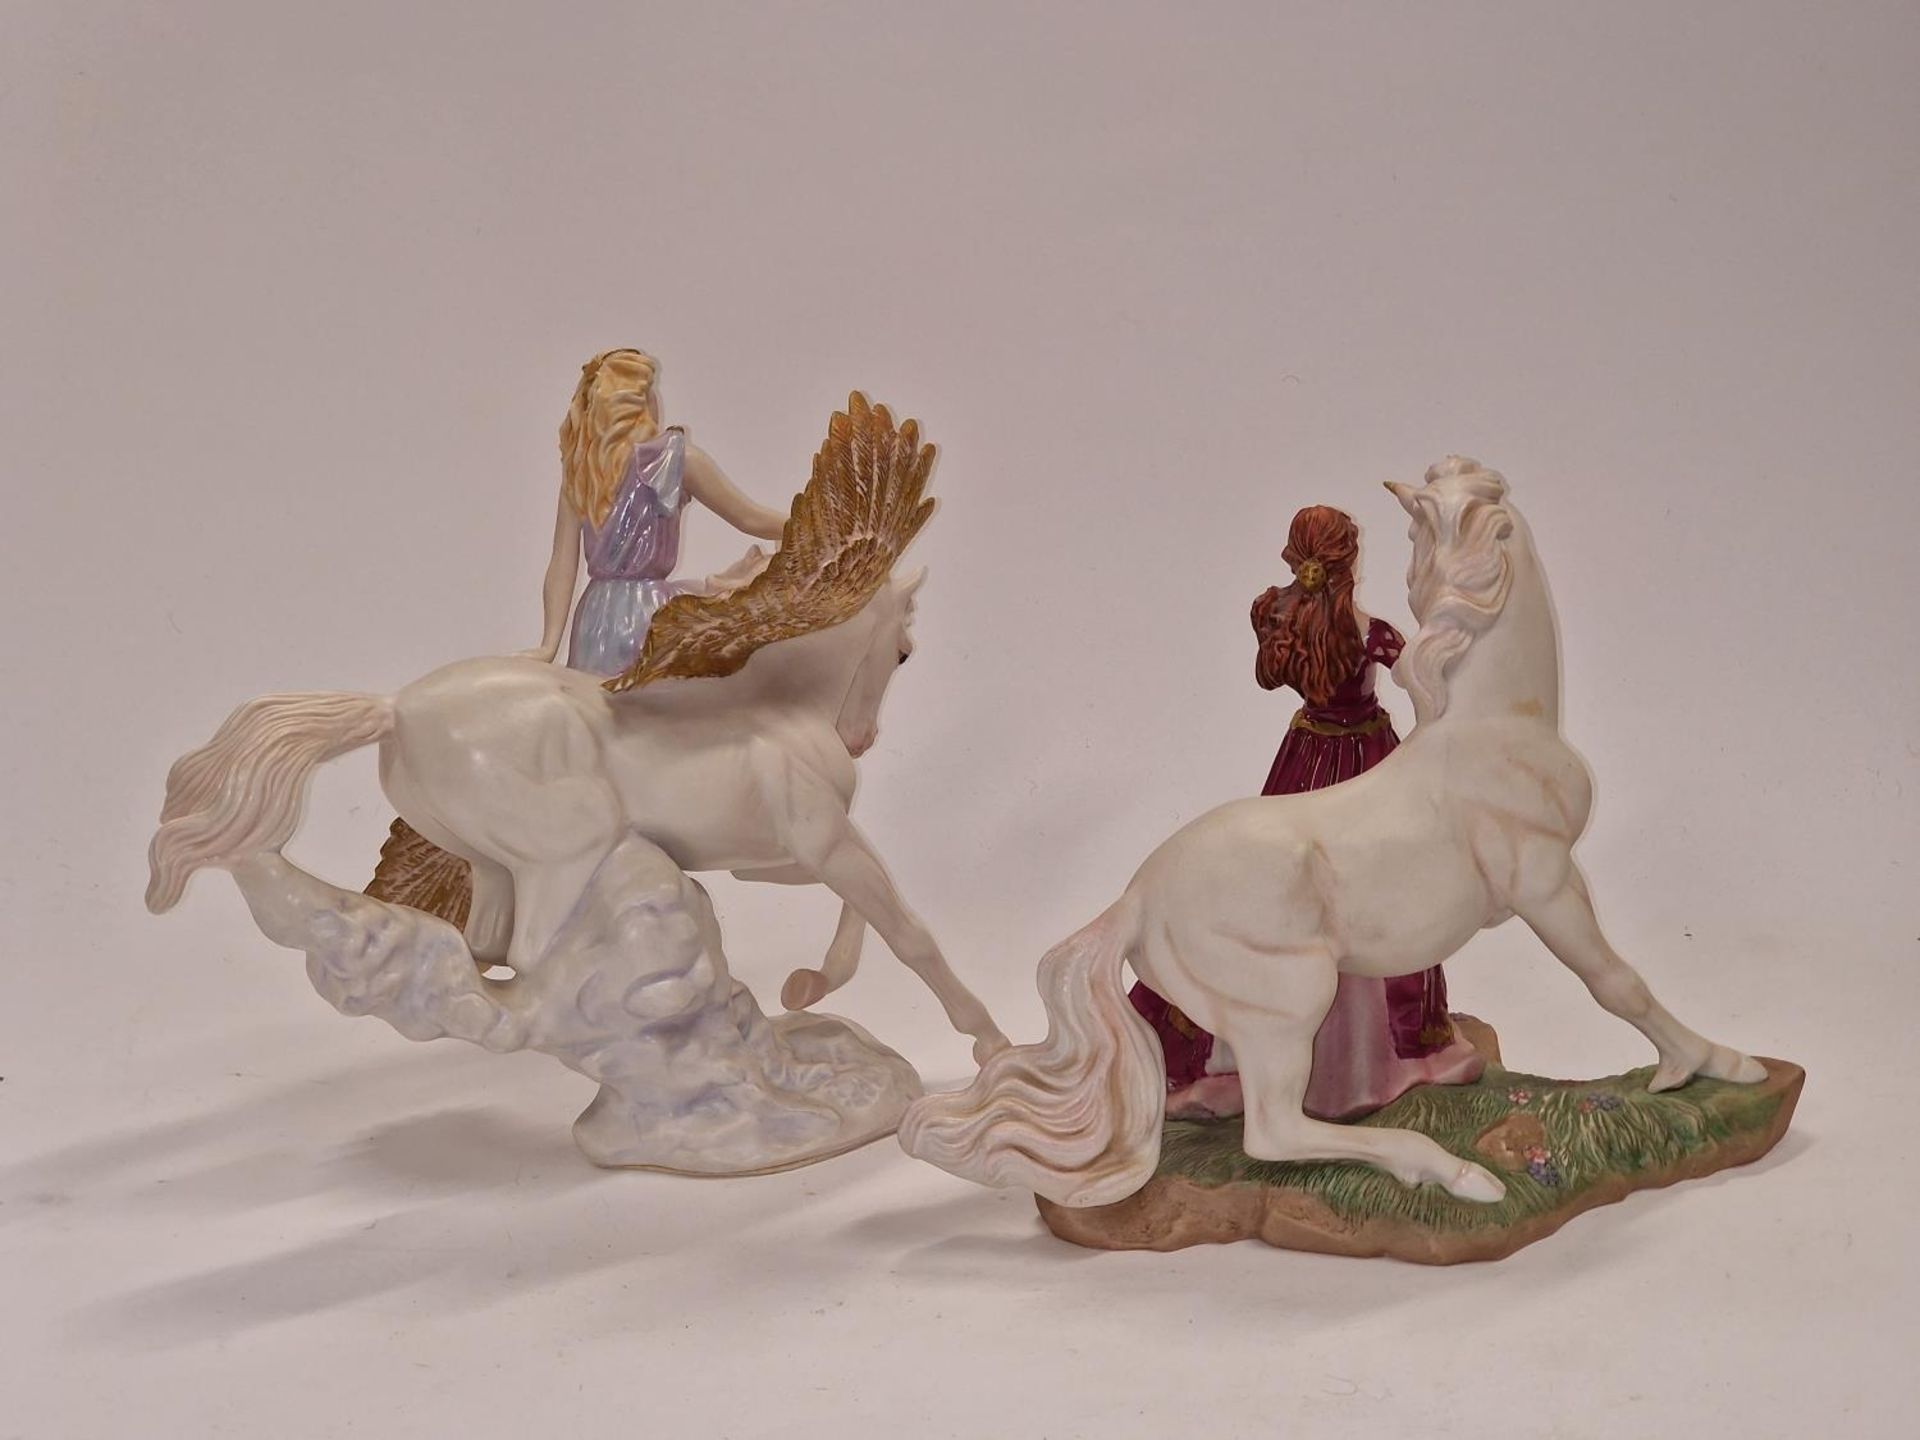 Two Franklin Mint porcelain figurines "The Lady and the Unicorn" and "Athene and Pegasus". - Image 2 of 2